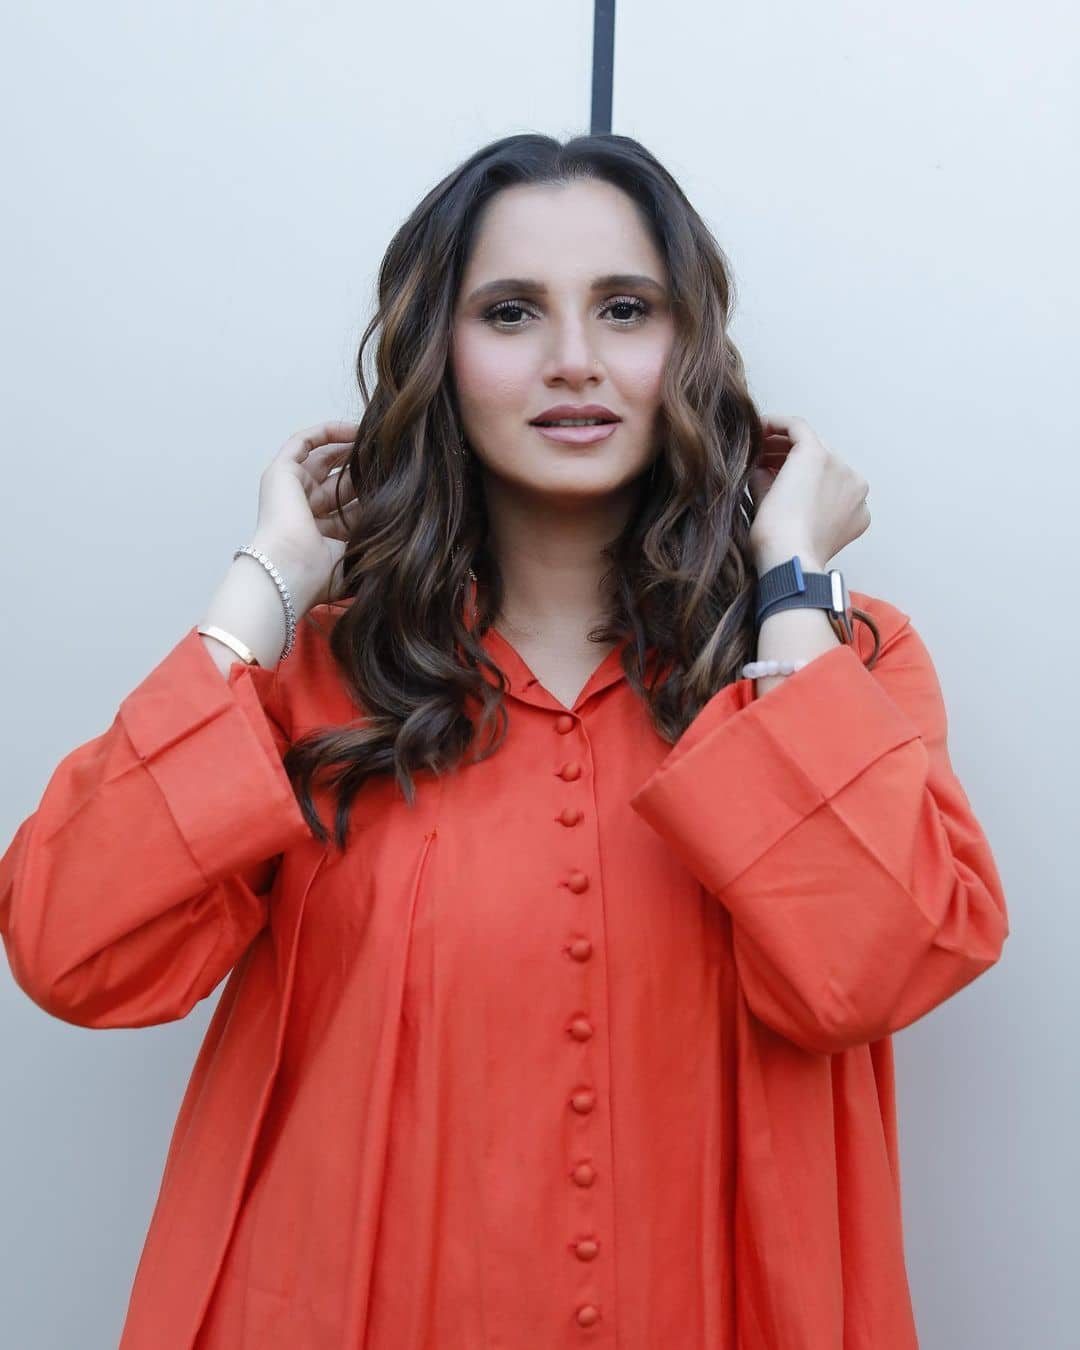 Sania Mirza in a new photoshoot